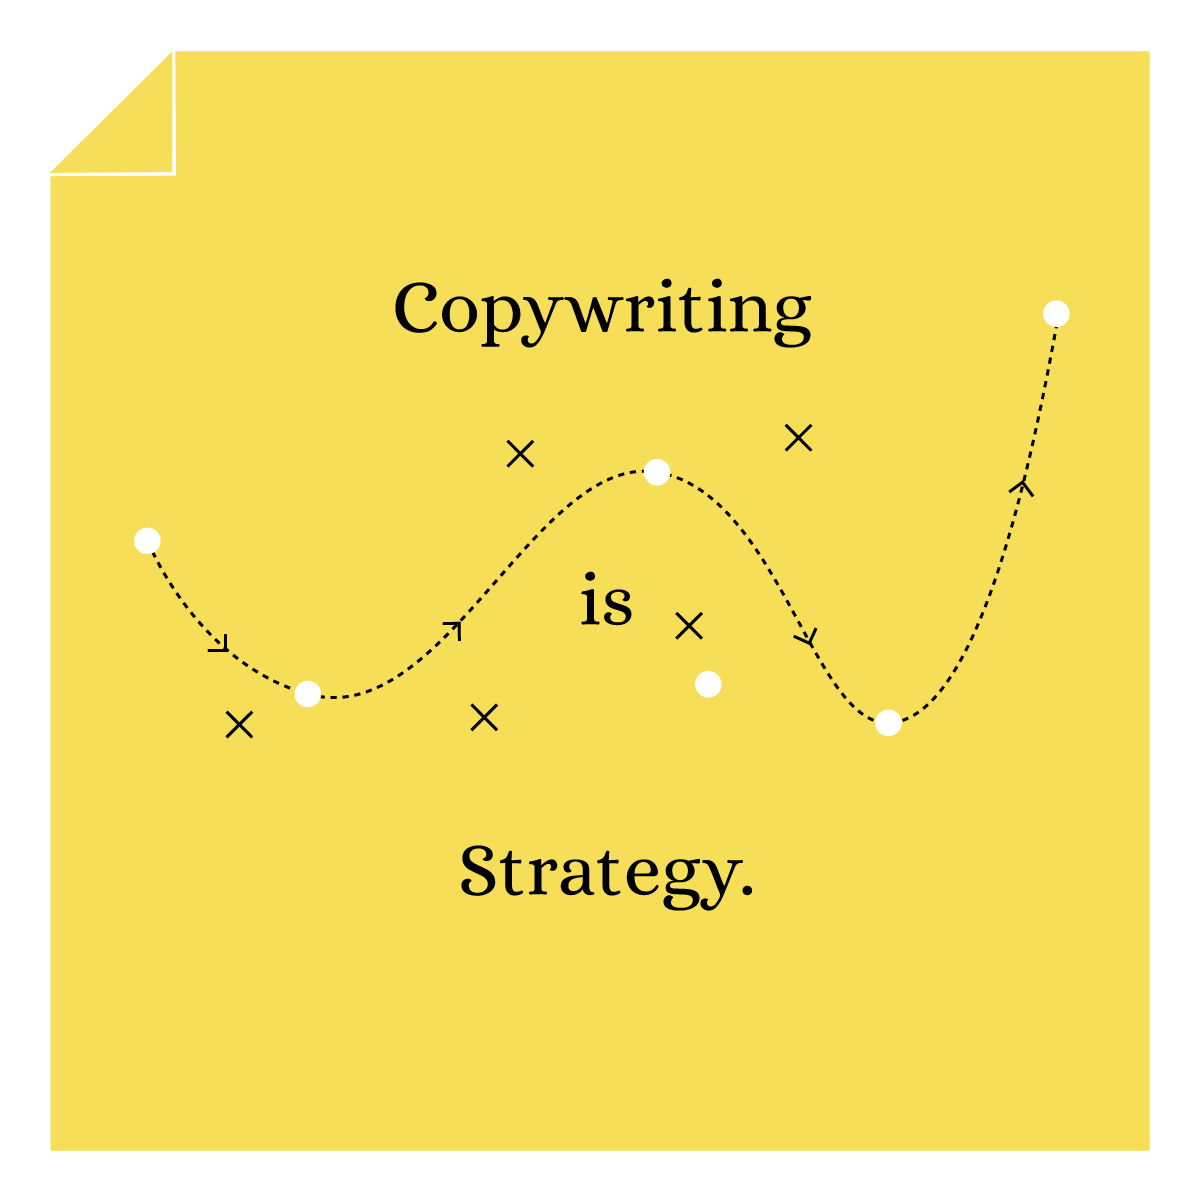 Conversion copywriting and lawyers have a lot in common.